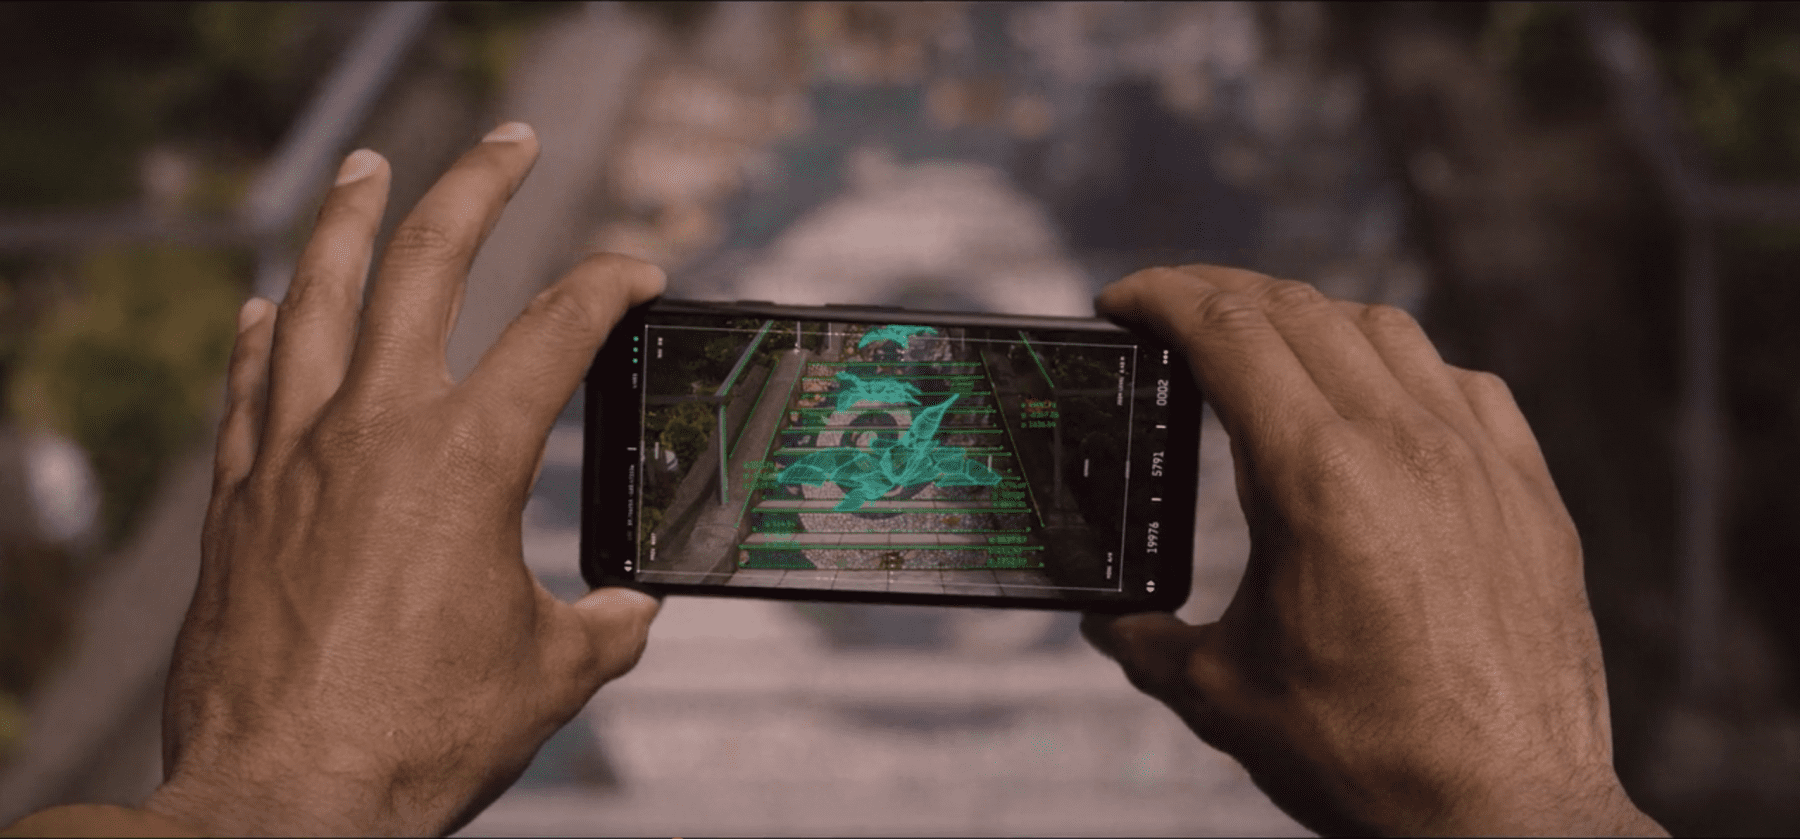 Karim explores augmented reality in The OA